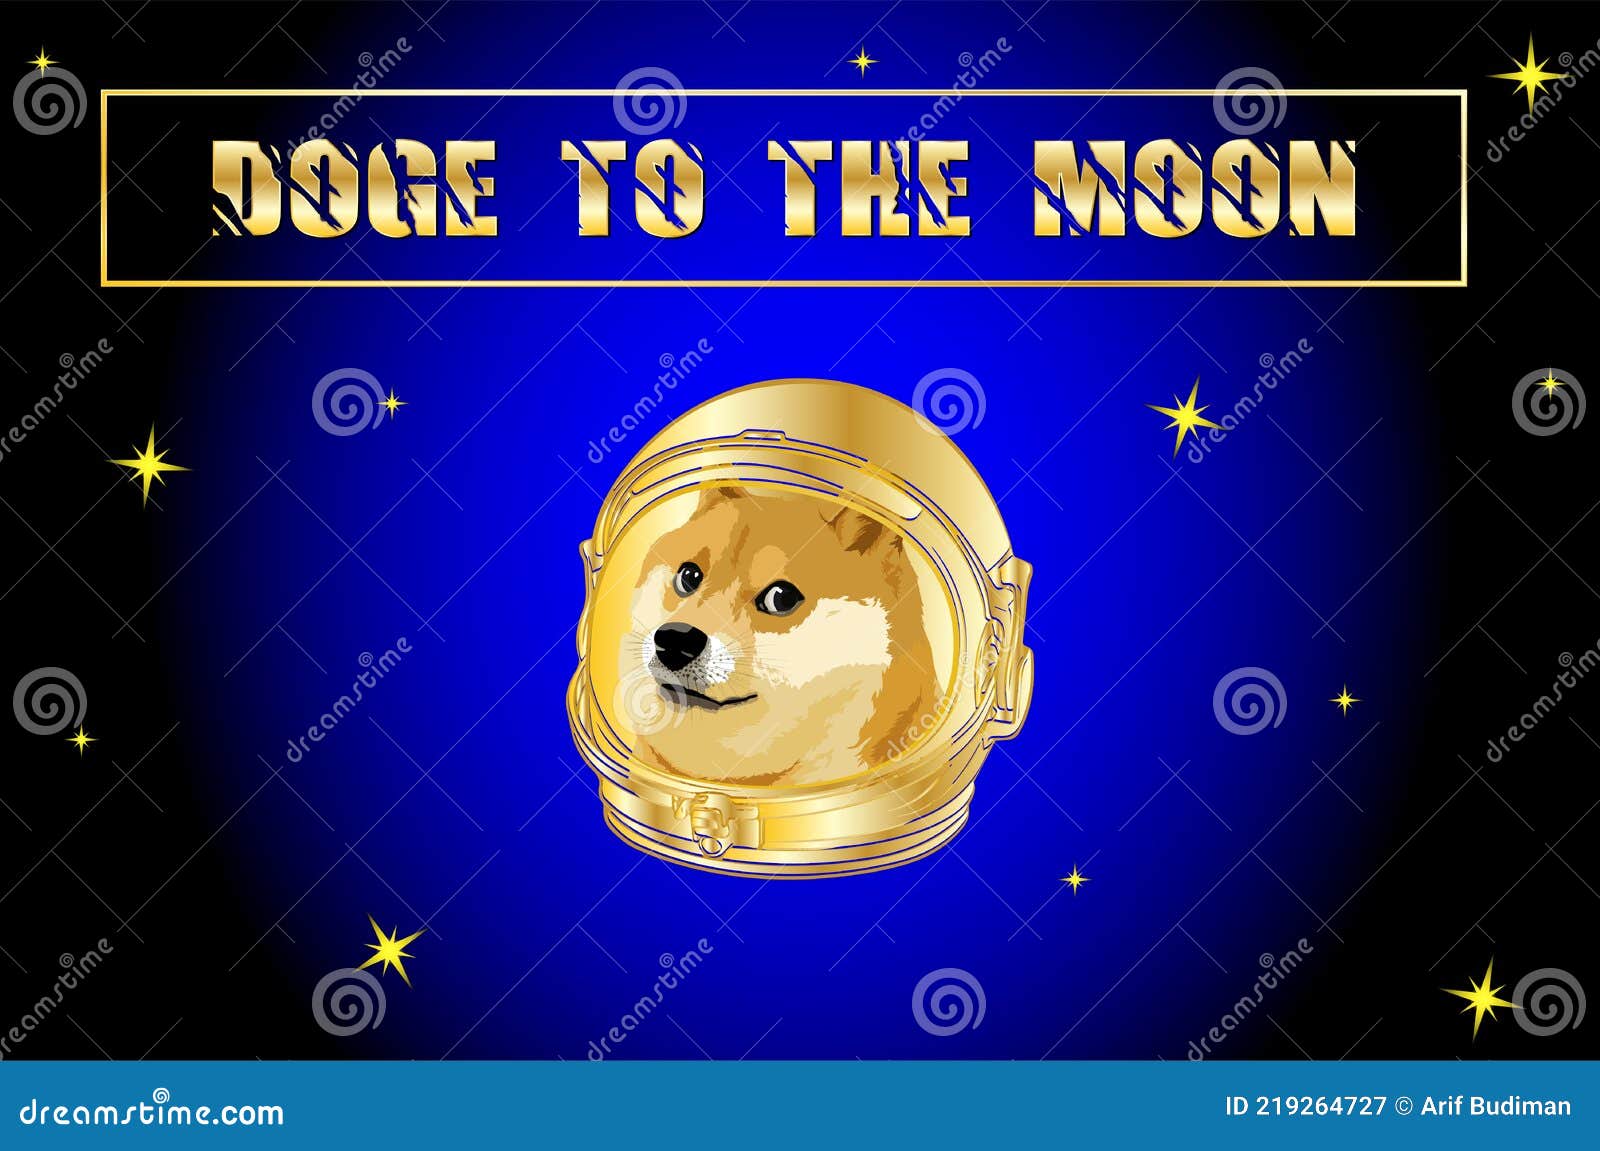 Dogecoin Futures Open Interest Jumps to 7B DOGE, Indicating Risky Bets